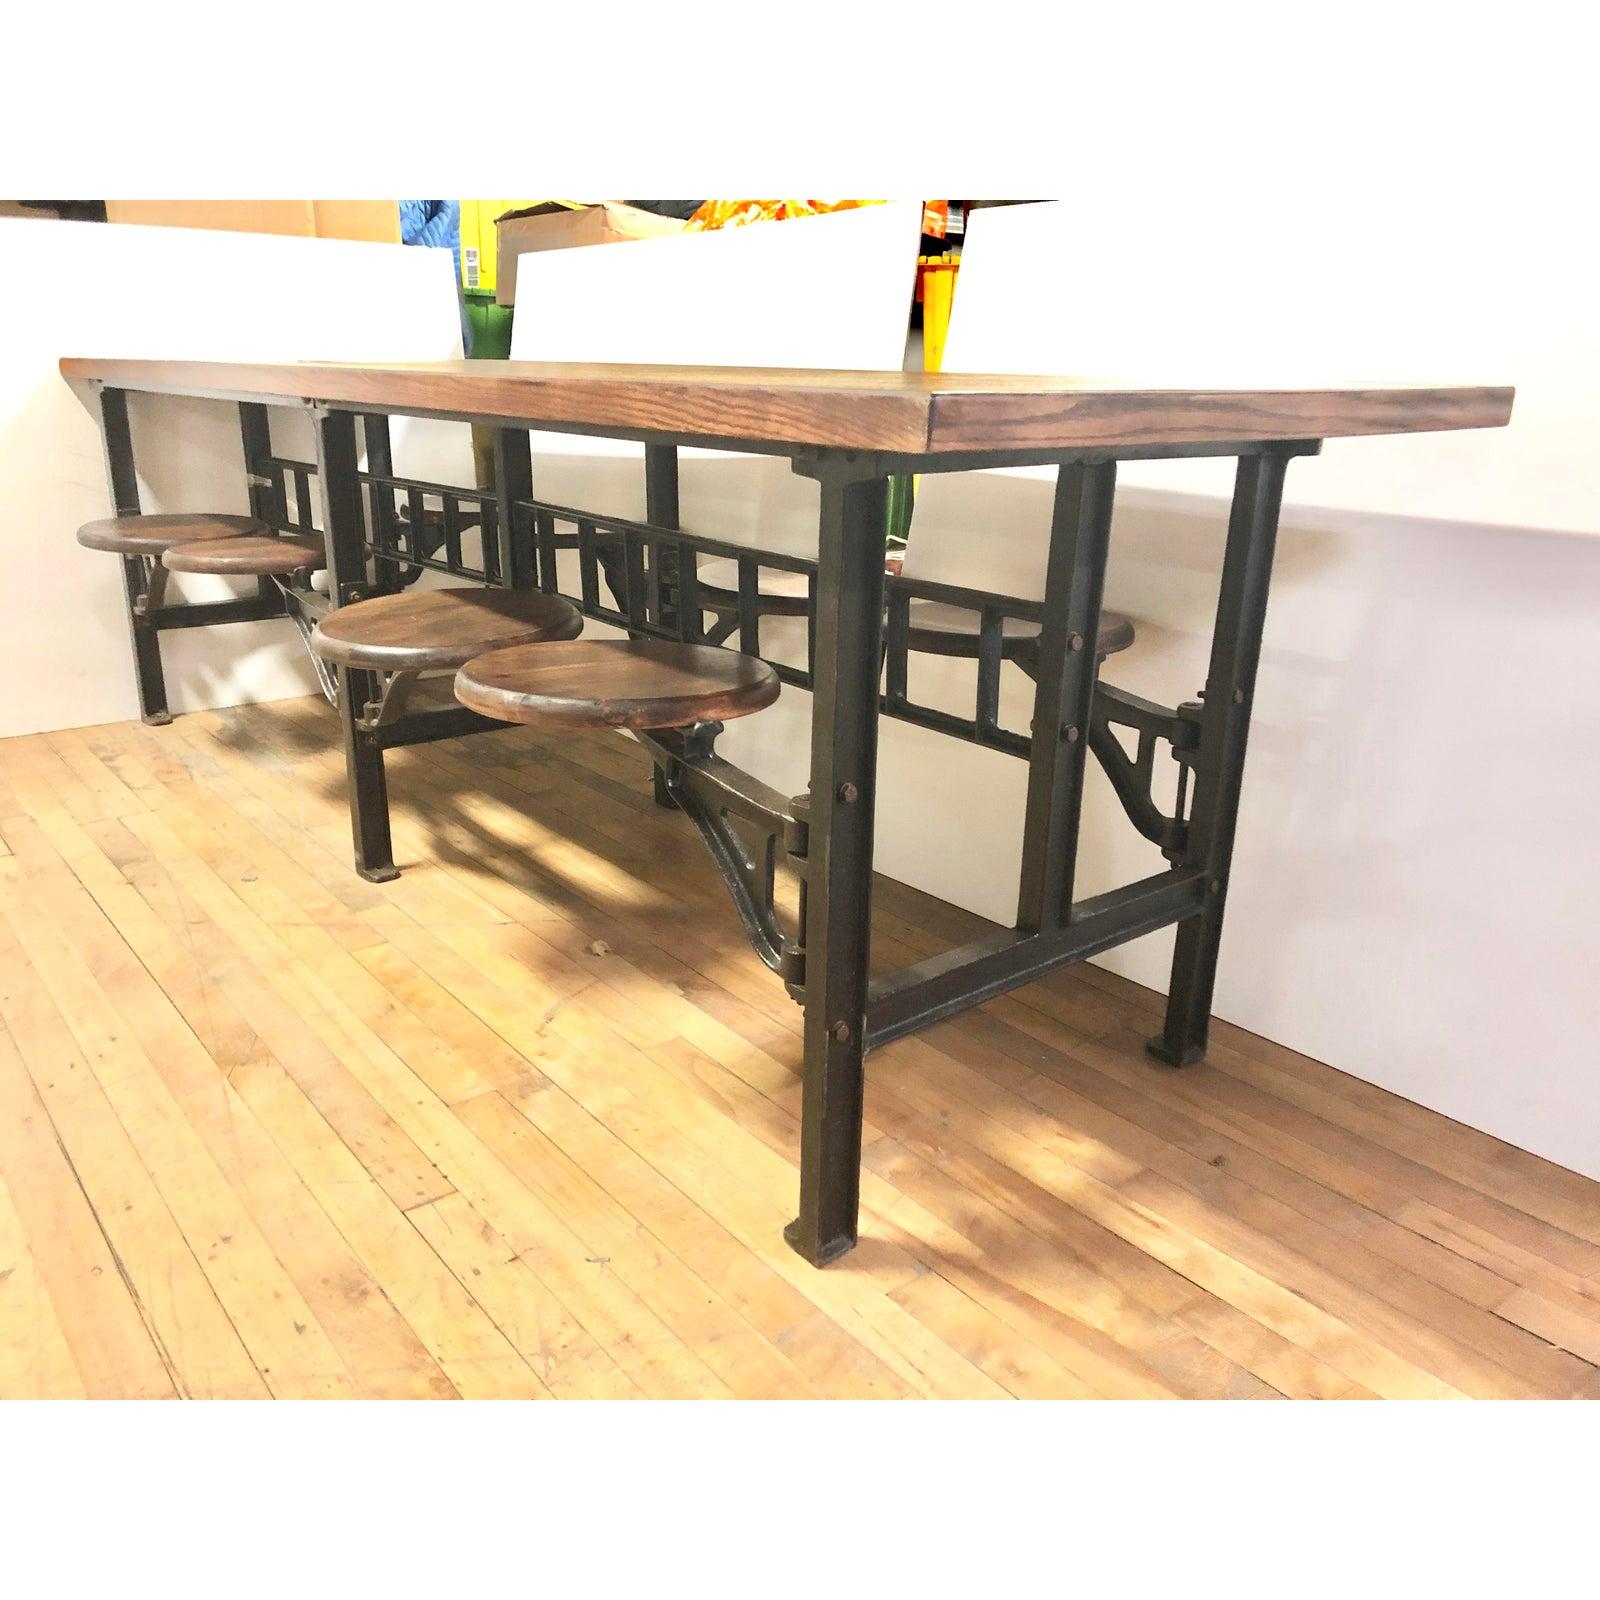 North American 1920s American Table 8 Swing Out Lunchroom Table